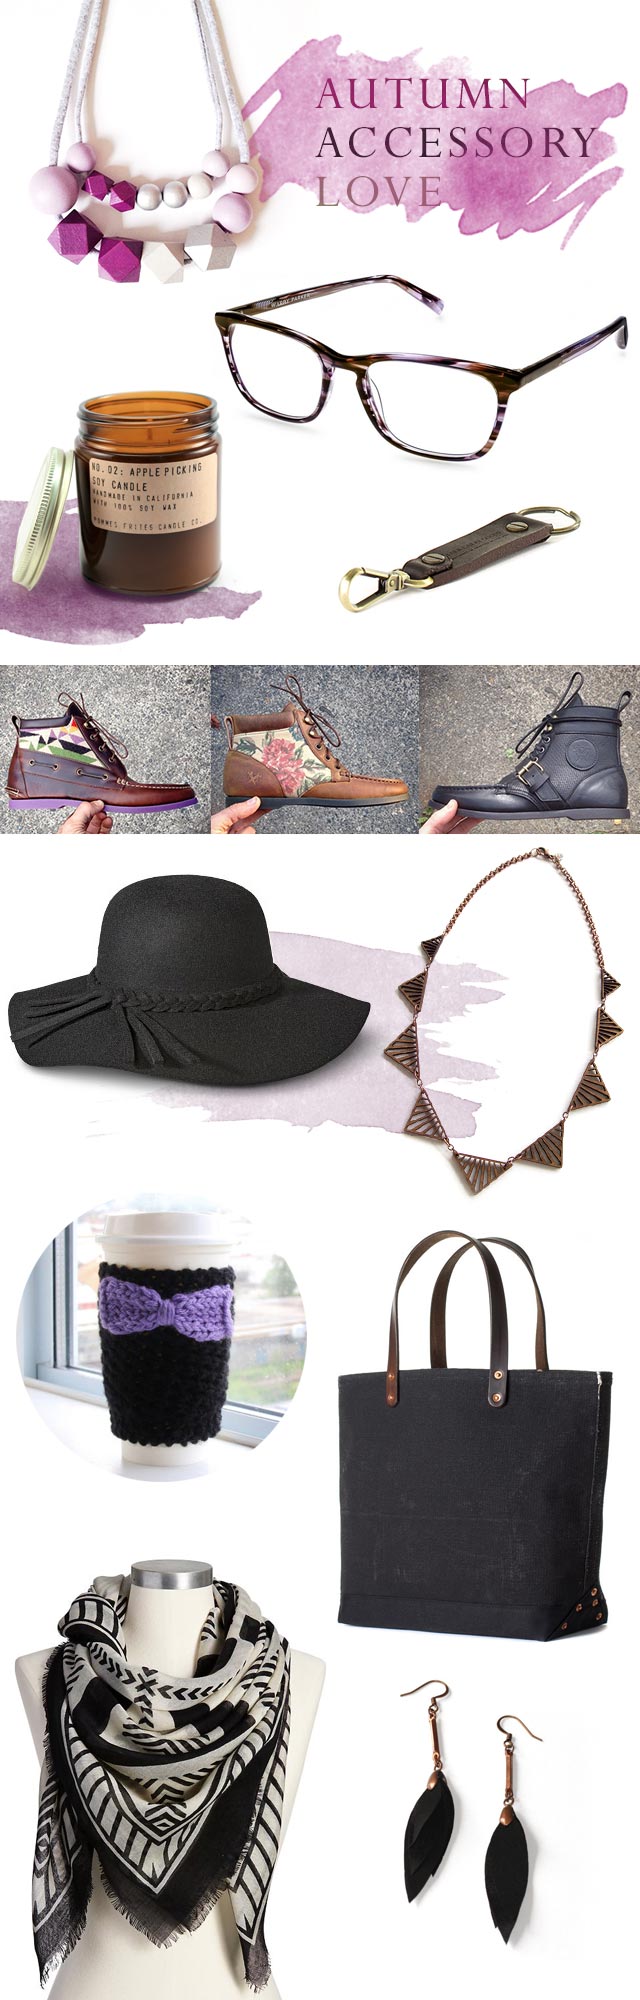 fall and winter accessories